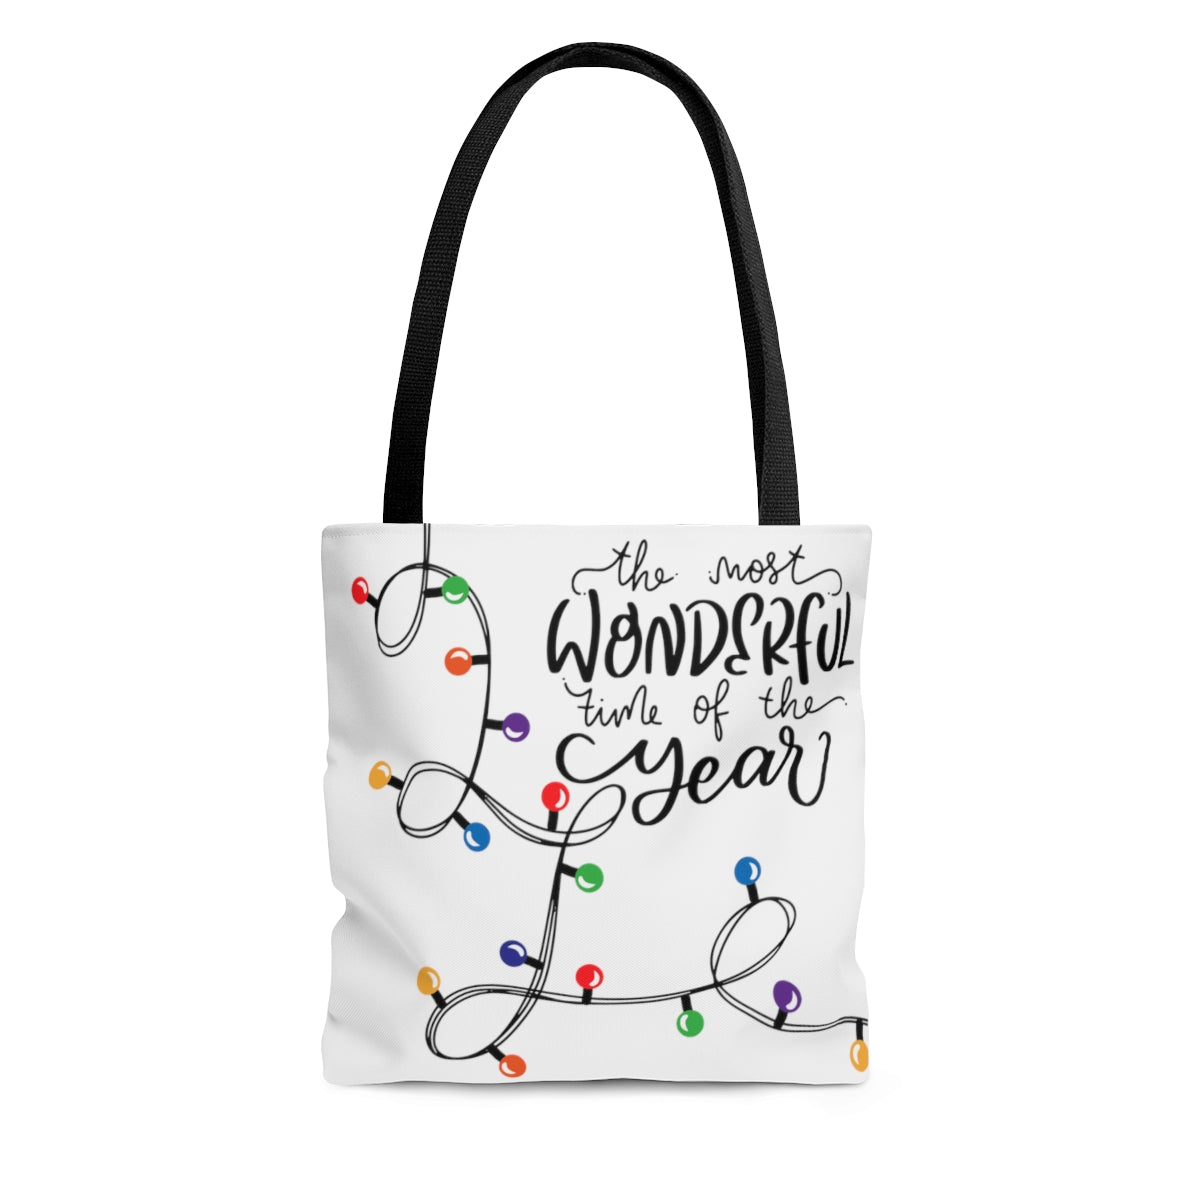 The Most Wonderful Time of Year Tote Bag - Travel Grocery Carry-on